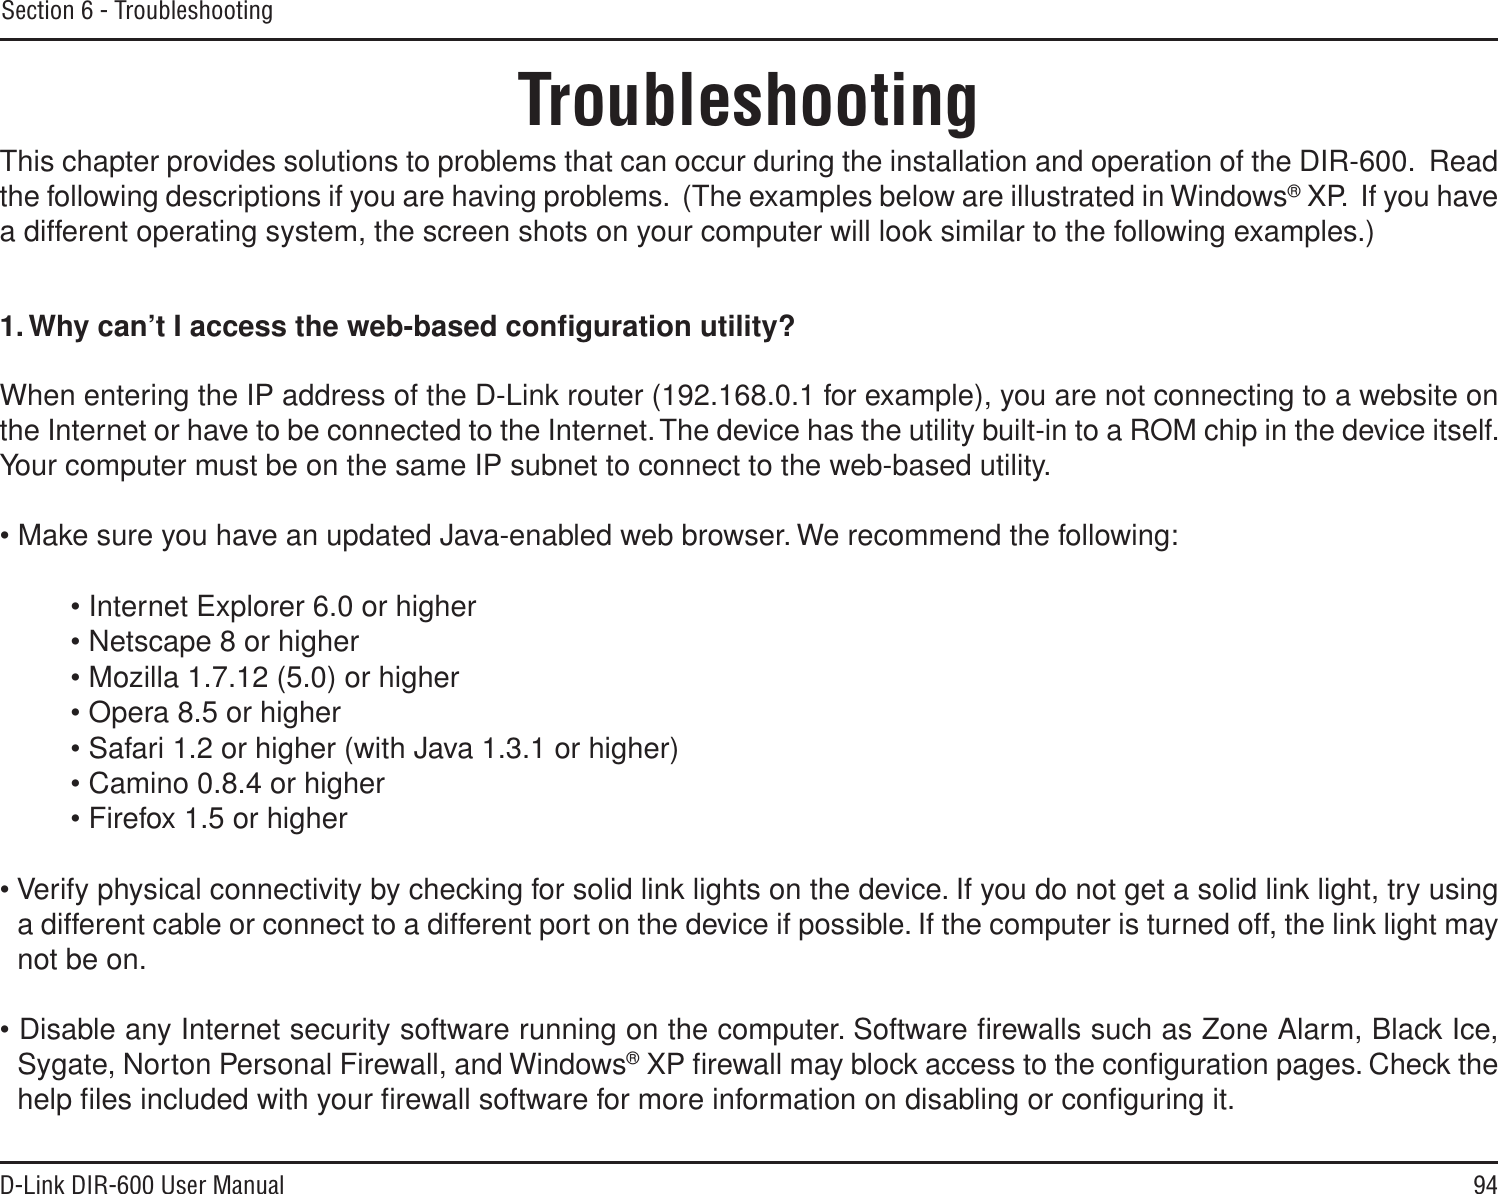 94D-Link DIR-600 User ManualSection 6 - TroubleshootingTroubleshootingThis chapter provides solutions to problems that can occur during the installation and operation of the DIR-600.  Read the following descriptions if you are having problems.  (The examples below are illustrated in Windows® XP.  If you have a different operating system, the screen shots on your computer will look similar to the following examples.)1.Why can’t I access the web-based conﬁguration utility?When entering the IP address of the D-Link router (192.168.0.1 for example), you are not connecting to a website on the Internet or have to be connected to the Internet. The device has the utility built-in to a ROM chip in the device itself. Your computer must be on the same IP subnet to connect to the web-based utility. • Make sure you have an updated Java-enabled web browser. We recommend the following: • Internet Explorer 6.0 or higher • Netscape 8 or higher • Mozilla 1.7.12 (5.0) or higher • Opera 8.5 or higher • Safari 1.2 or higher (with Java 1.3.1 or higher) • Camino 0.8.4 or higher • Firefox 1.5 or higher • Verify physical connectivity by checking for solid link lights on the device. If you do not get a solid link light, try using a different cable or connect to a different port on the device if possible. If the computer is turned off, the link light may not be on.• Disable any Internet security software running on the computer. Software ﬁrewalls such as Zone Alarm, Black Ice, Sygate, Norton Personal Firewall, and Windows® XP ﬁrewall may block access to the conﬁguration pages. Check the help ﬁles included with your ﬁrewall software for more information on disabling or conﬁguring it.